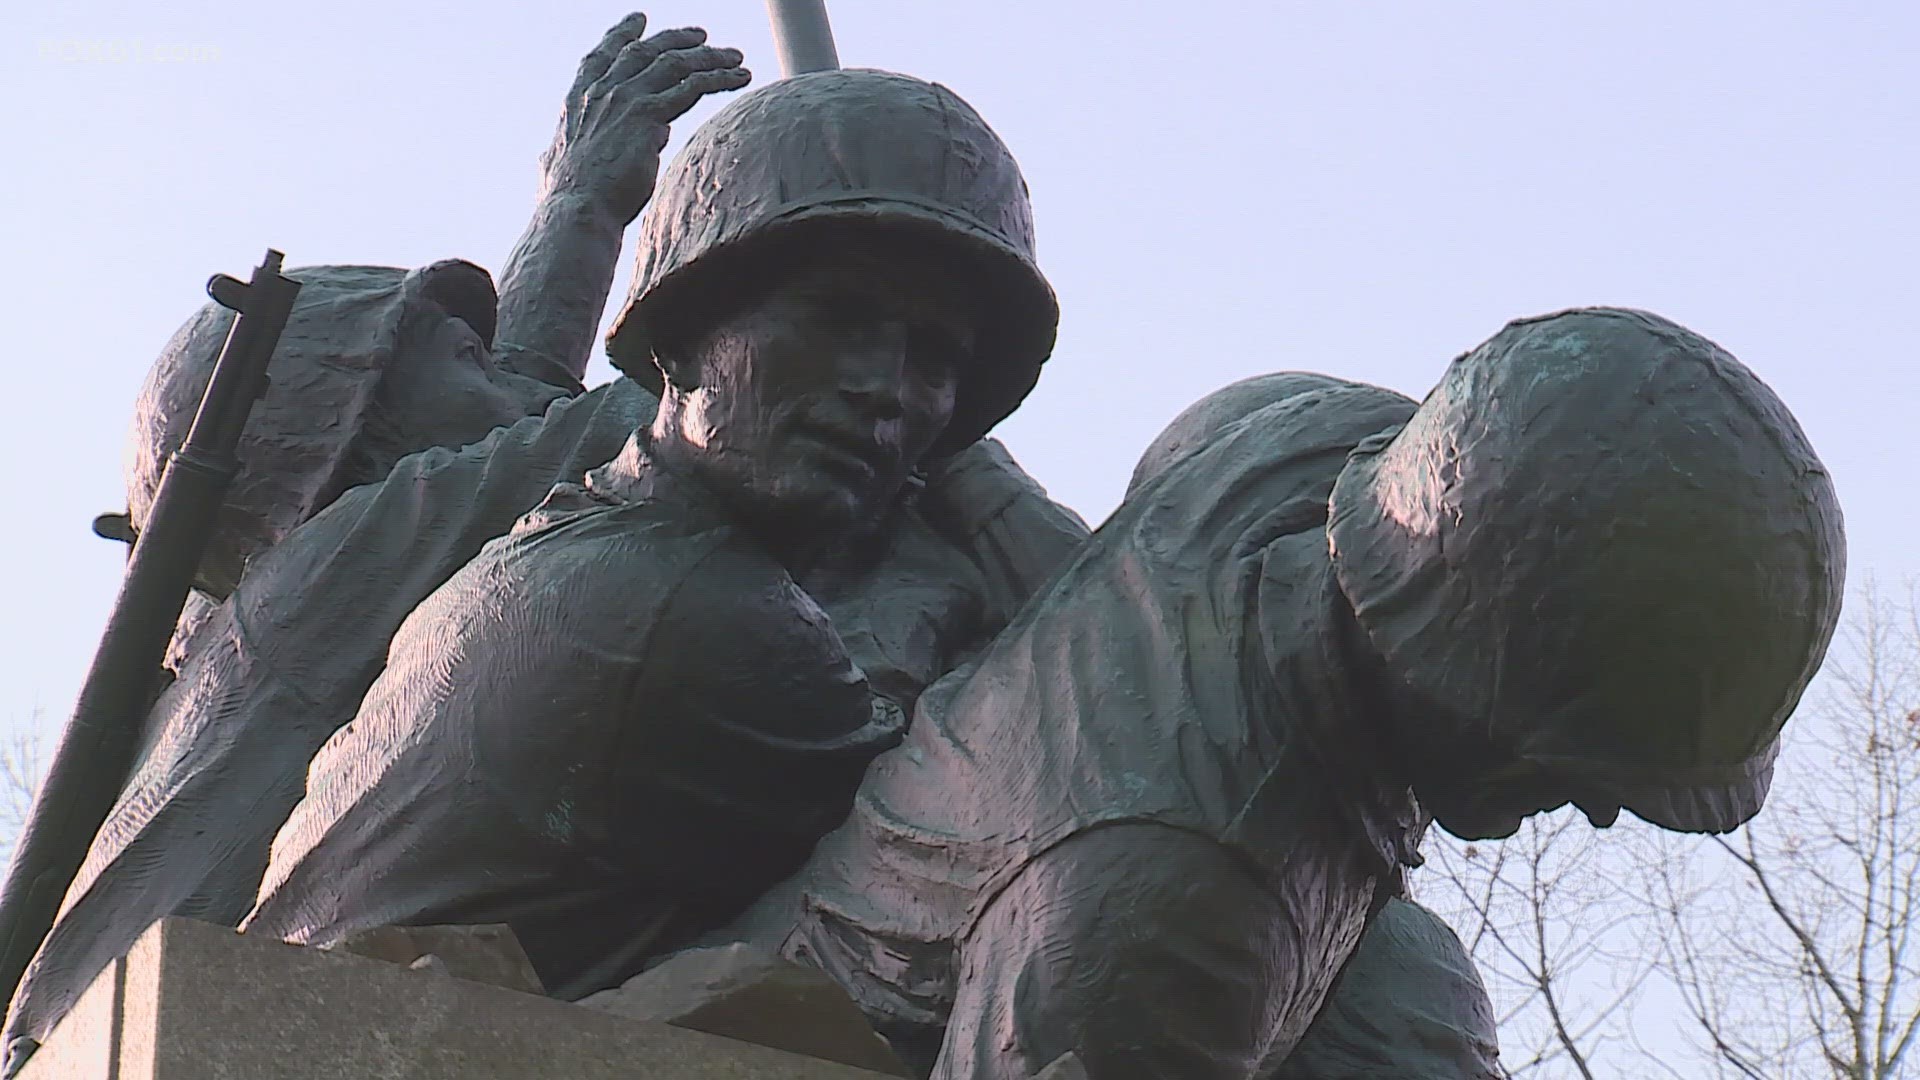 The Iwo Jima Memorial in New Britain will soon have a kiosk to help visitors learn information about the war and the people who didn't come home.